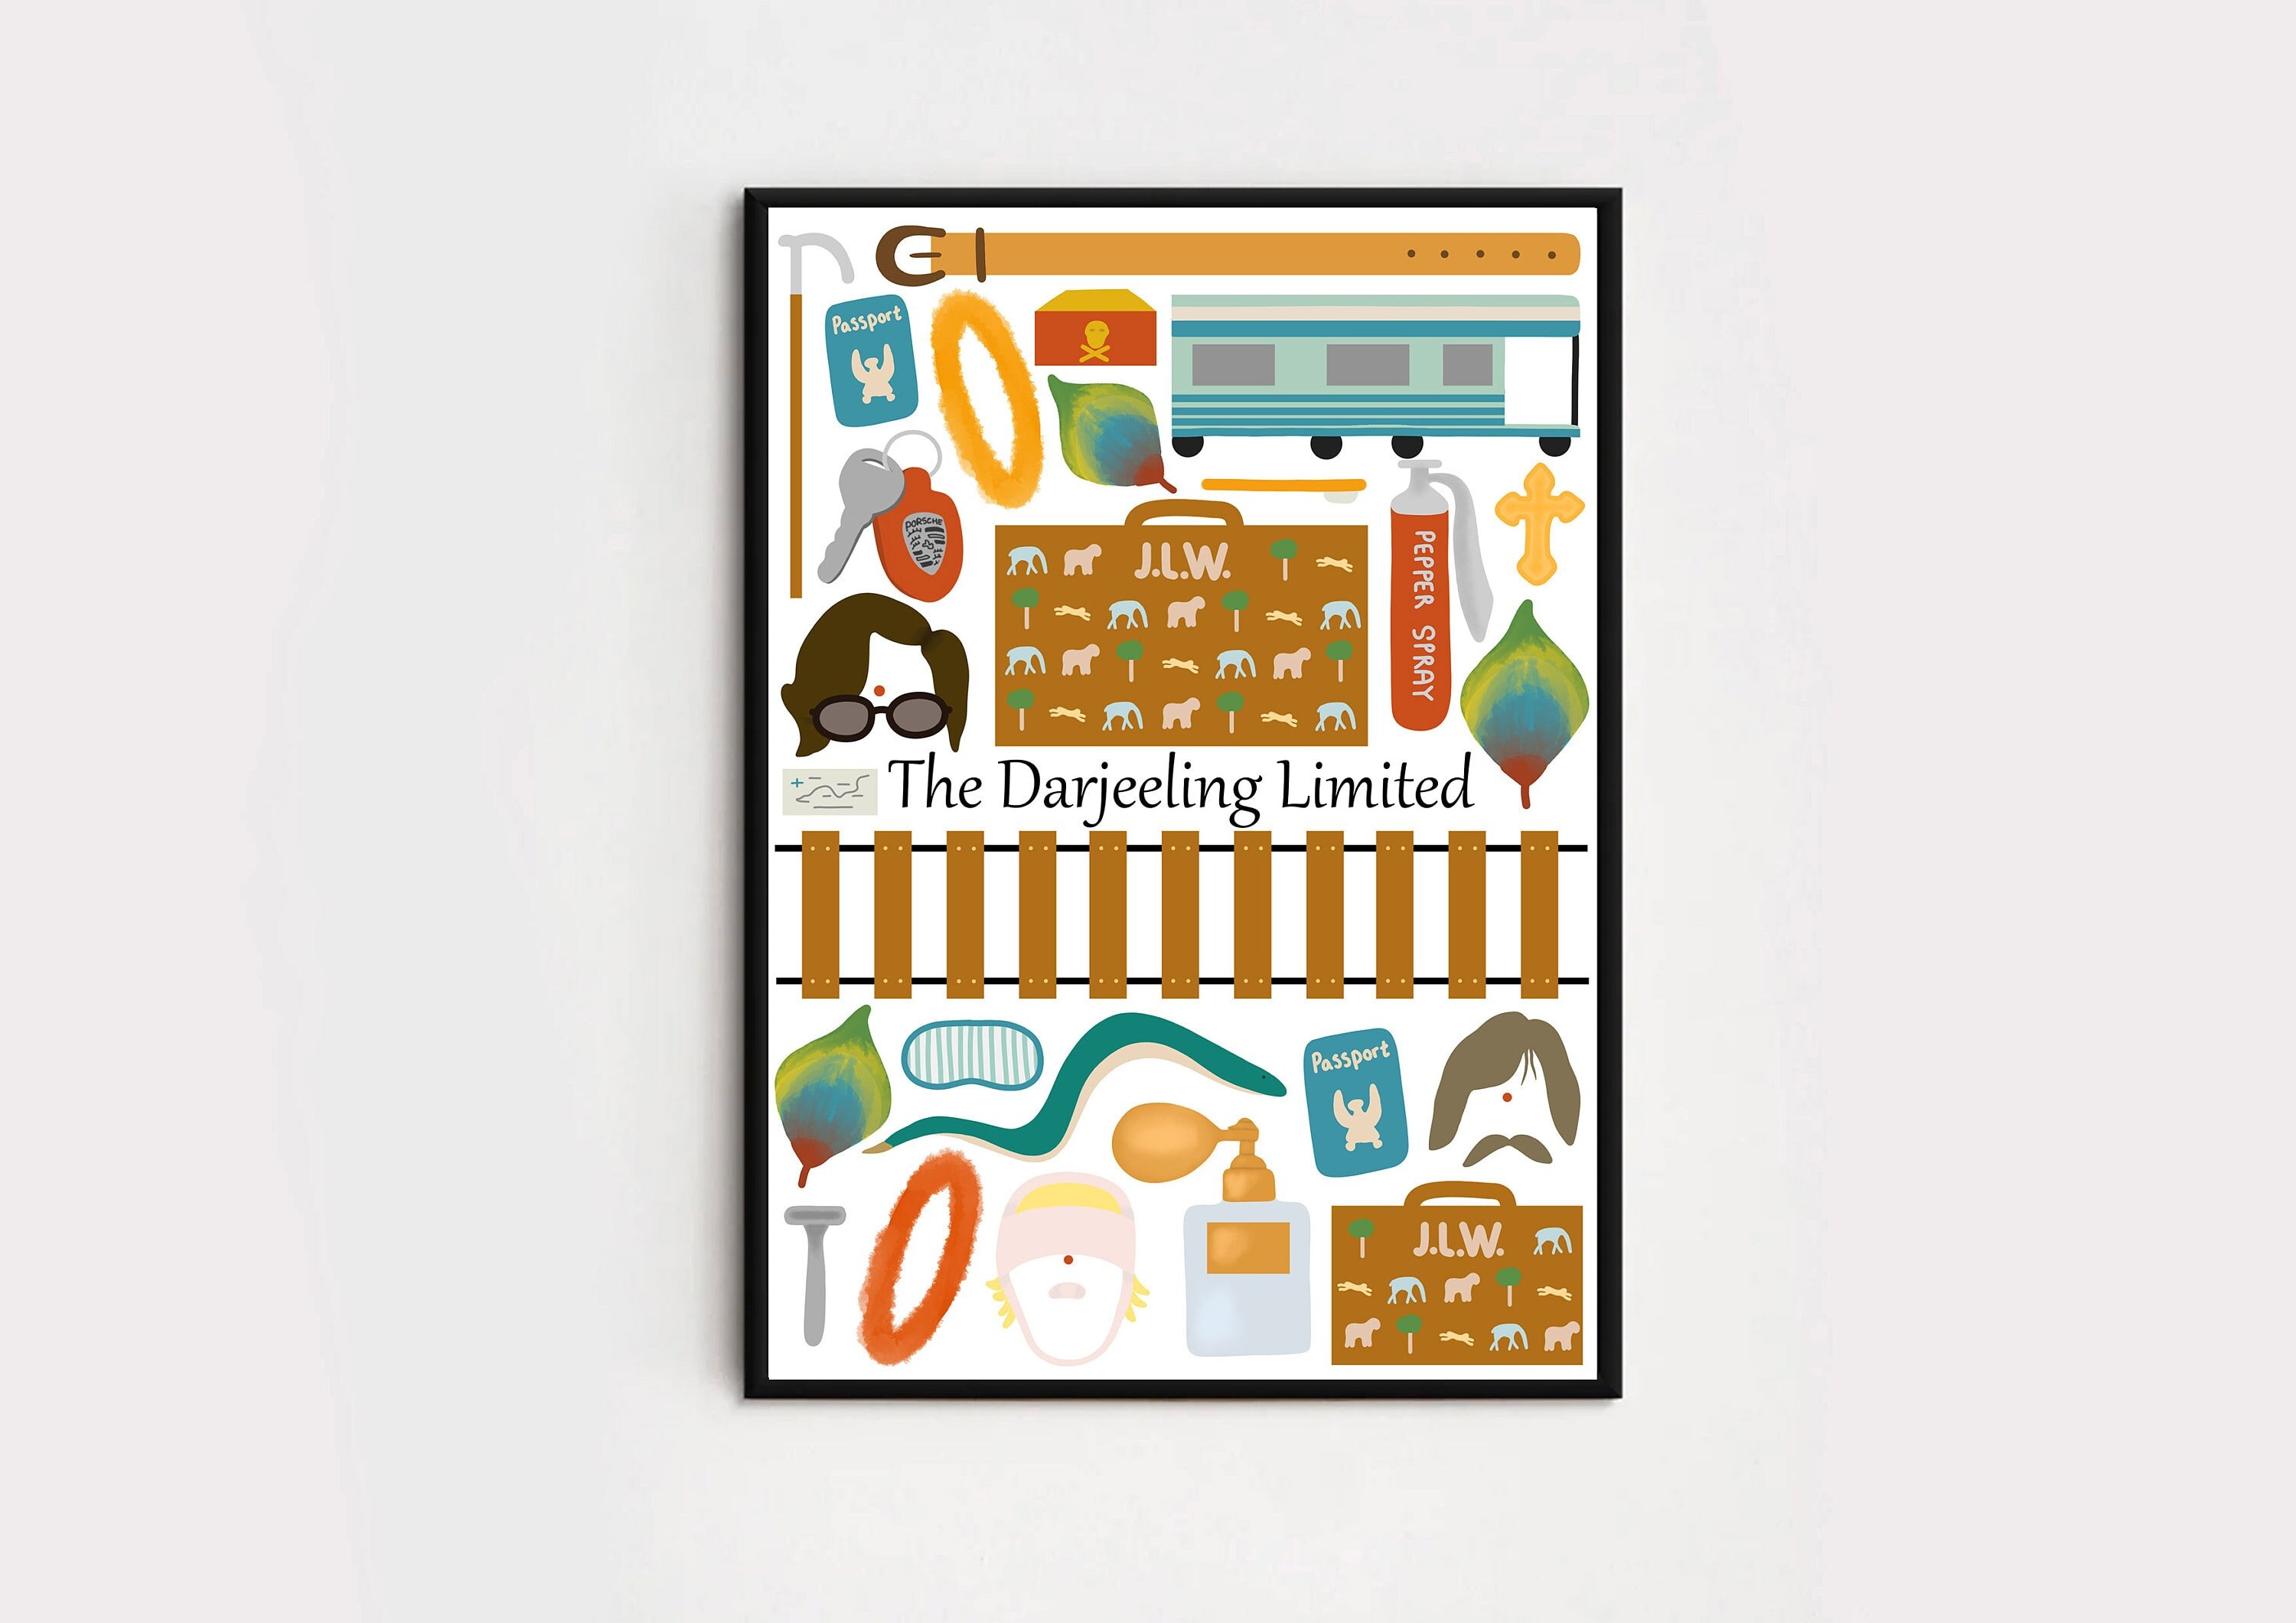 Wes Anderson Darjeeling Limited Poster for Sale by sleepymountain